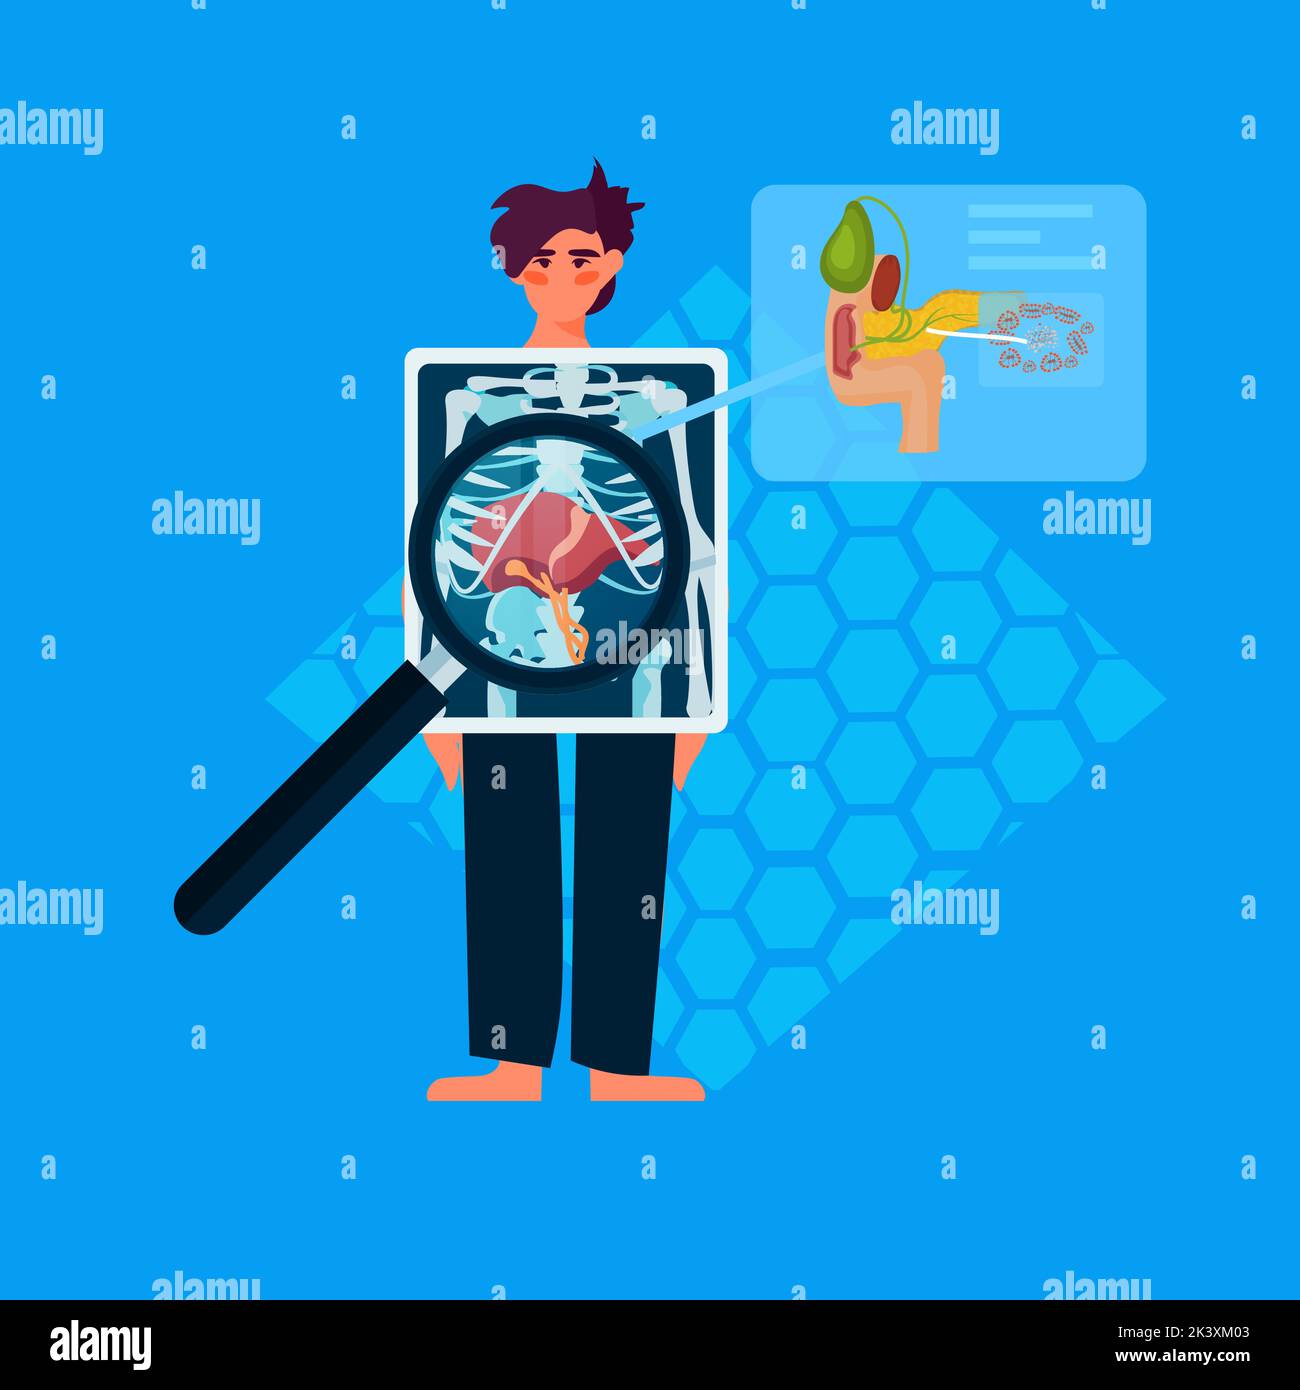 examination of male patient liver internal organ X-ray health care medical treatment concept vector illustration Stock Vector